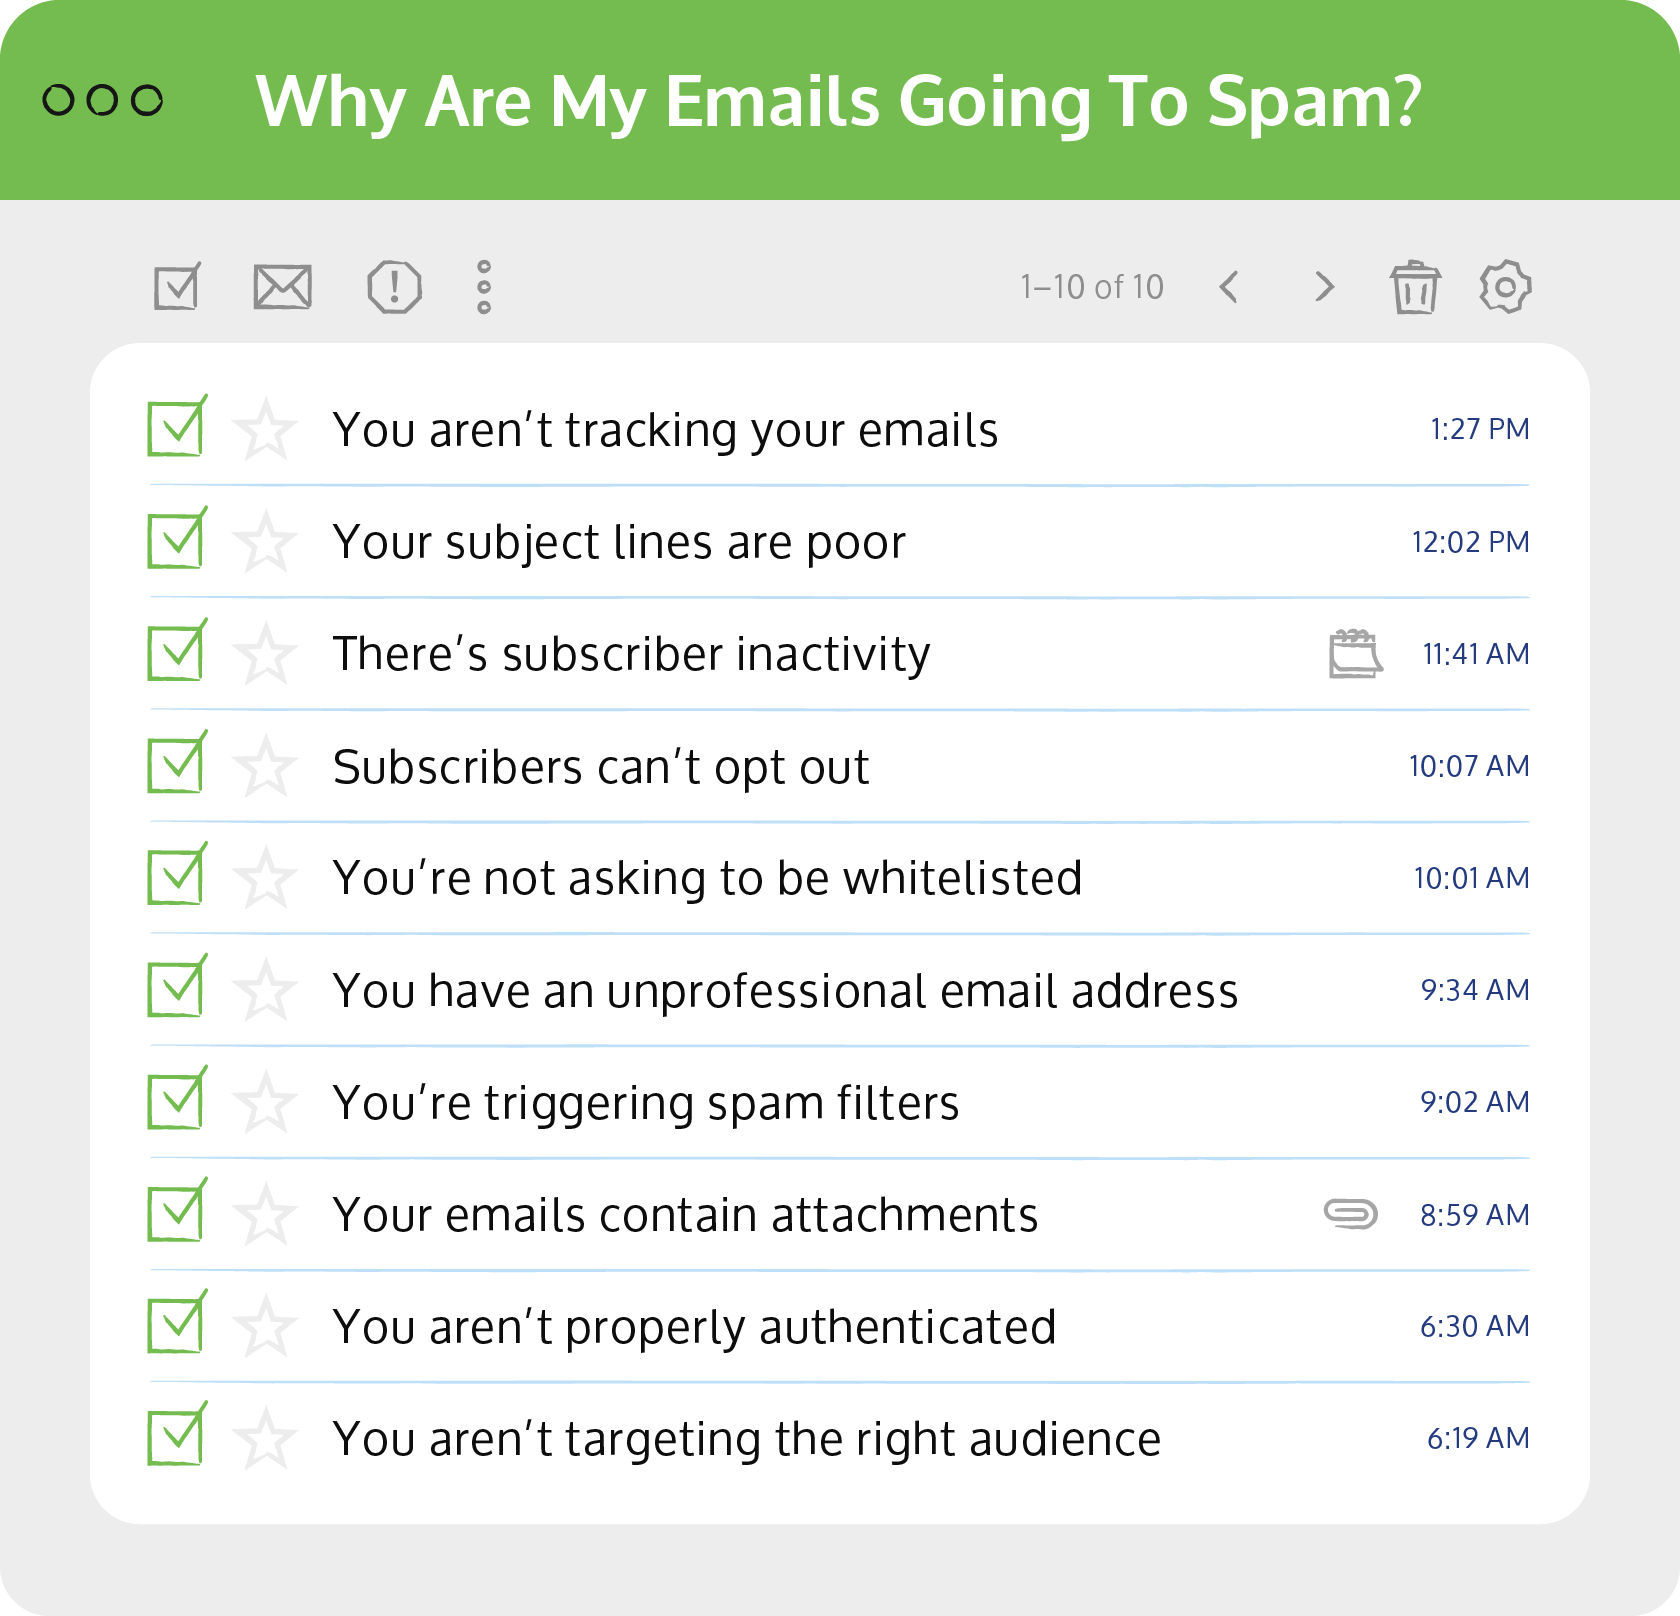 reasons my emails are going to spam.